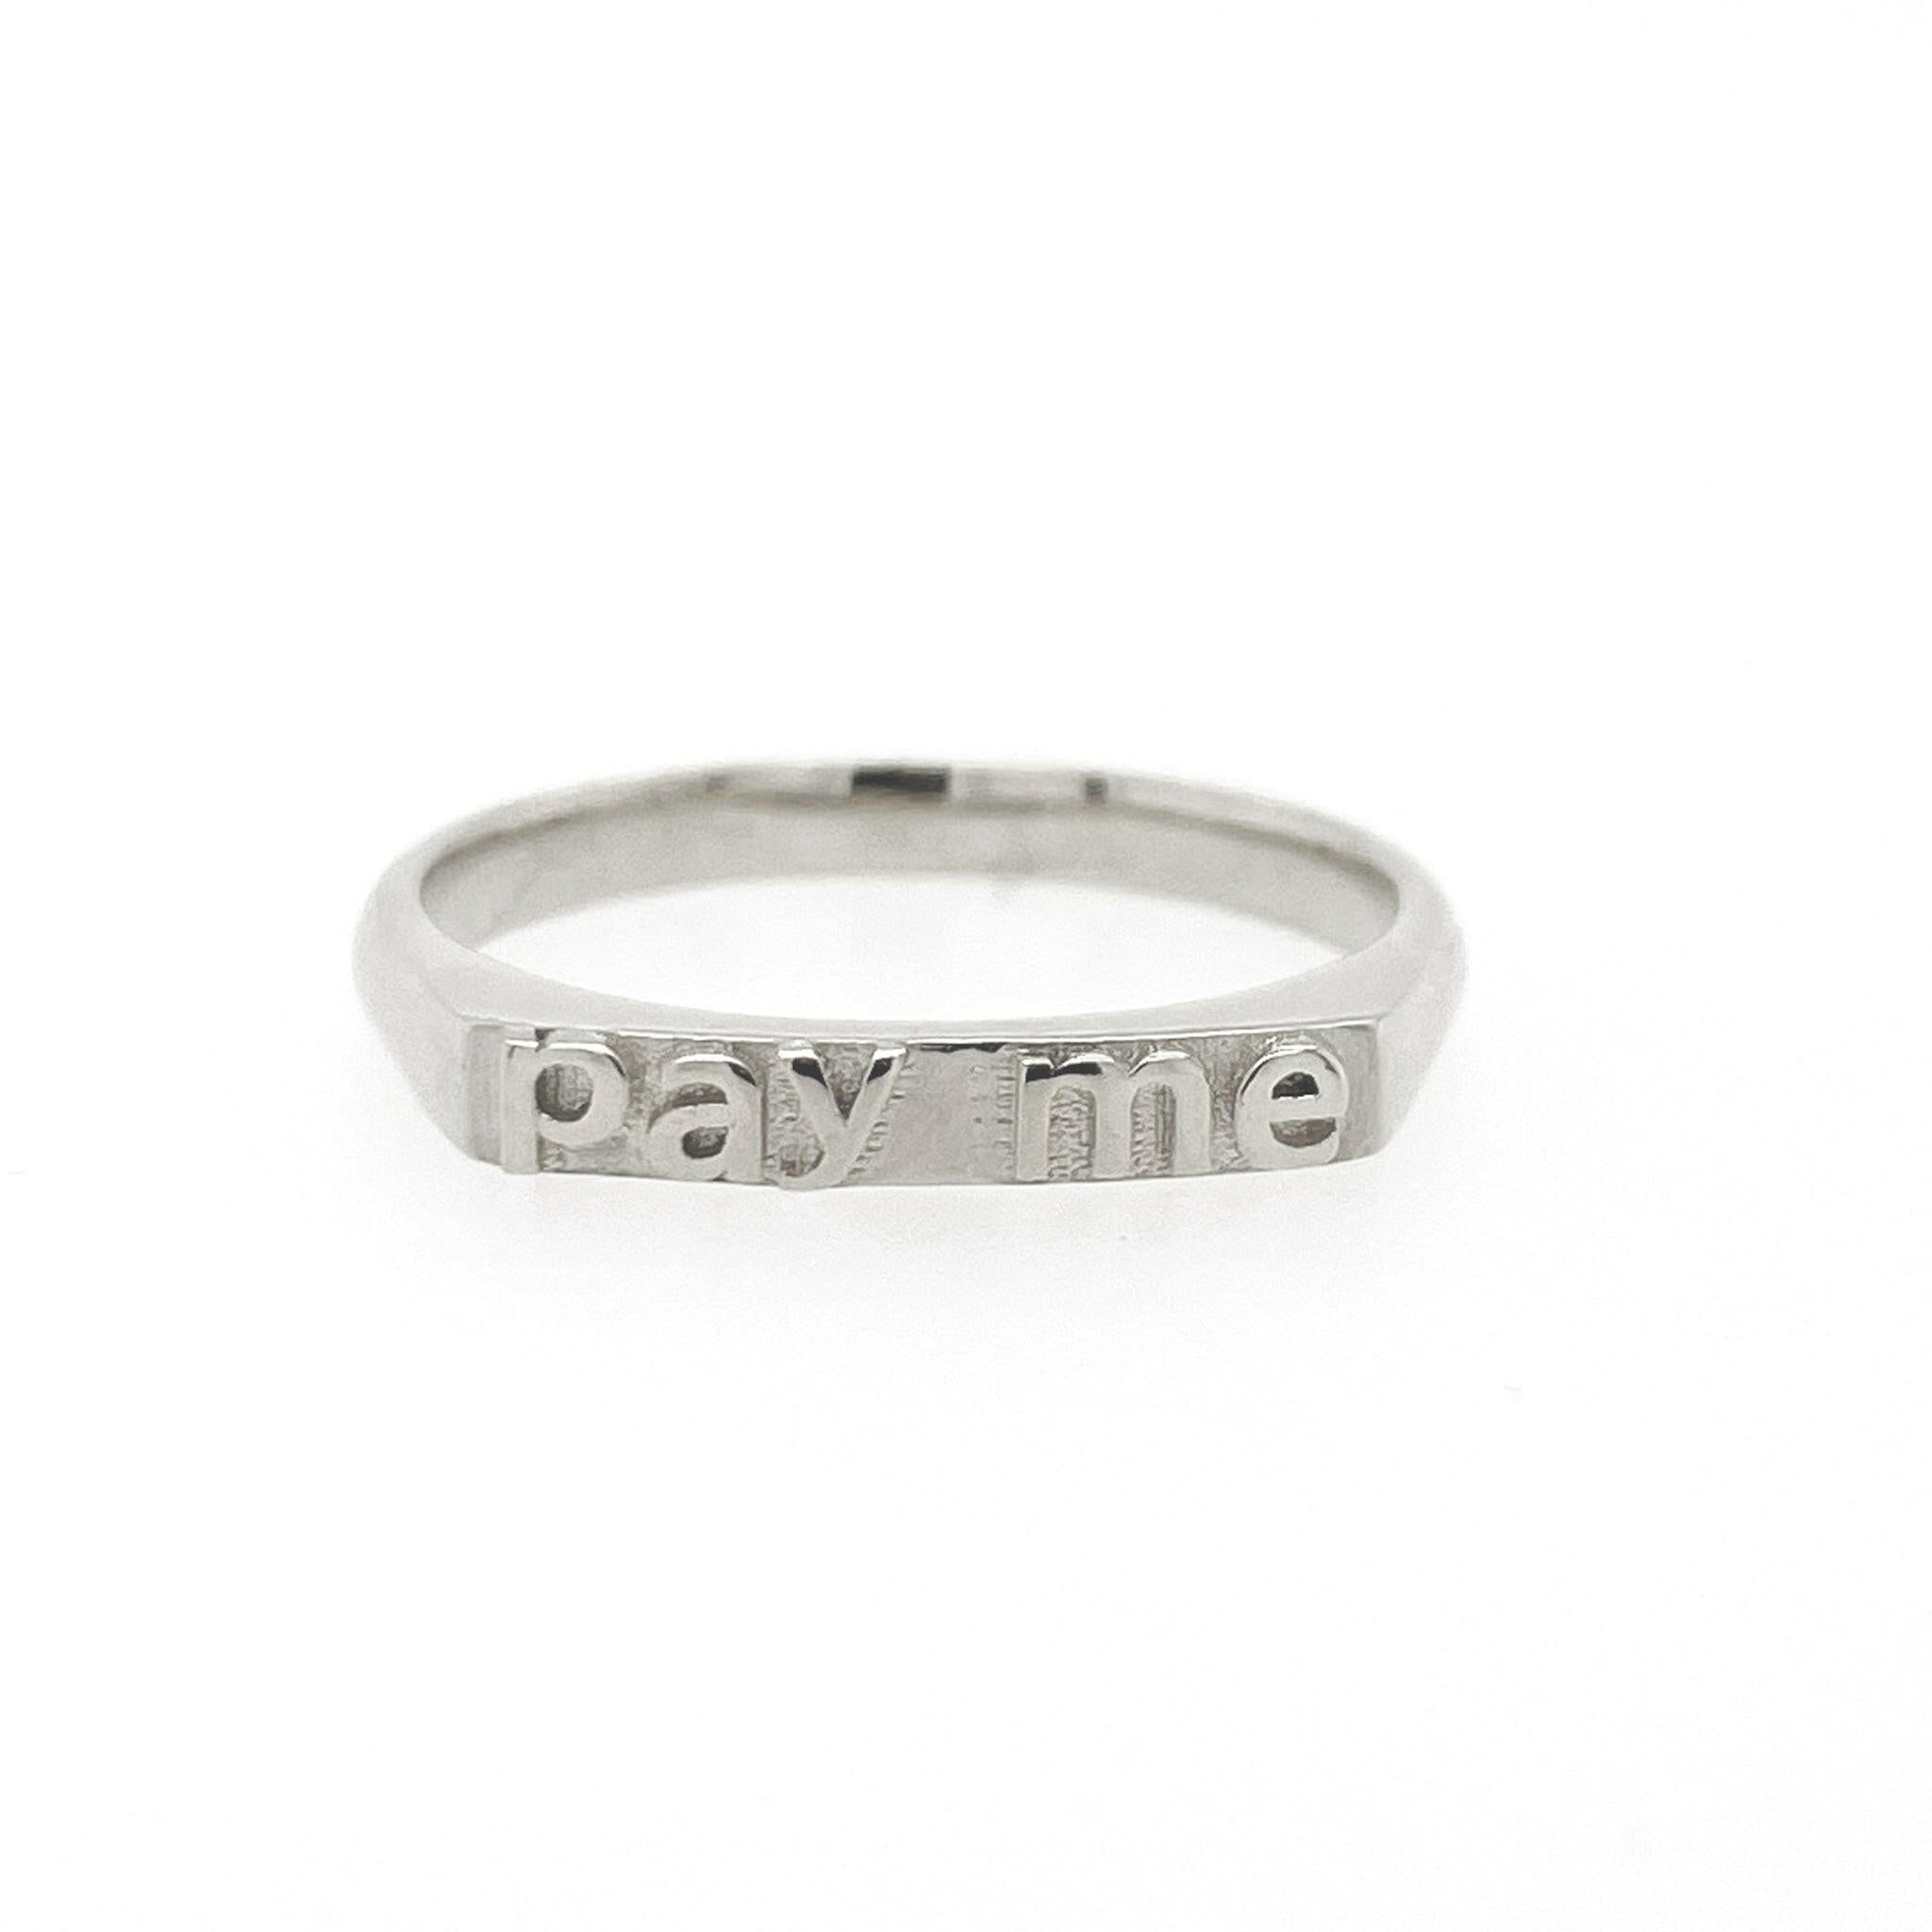 front view of 14 karat white gold ring with text that reads "pay me"